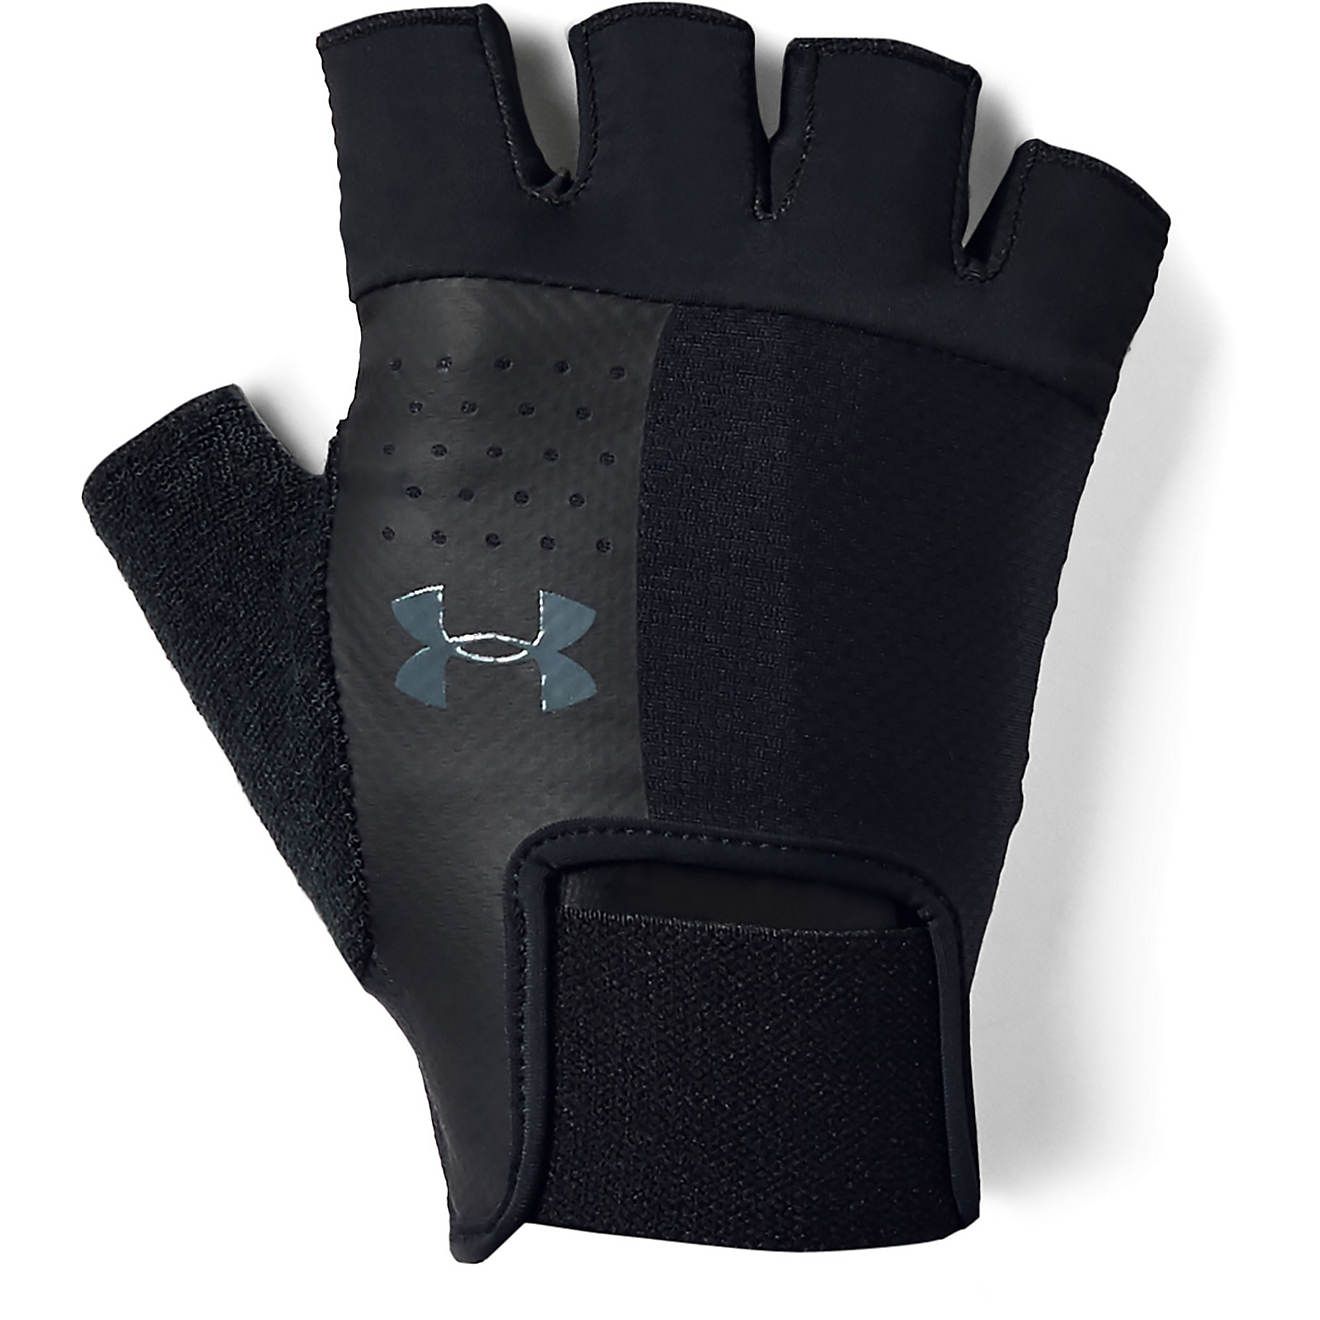 Under Armour Men’s Training Gloves | Academy | Academy Sports + Outdoors